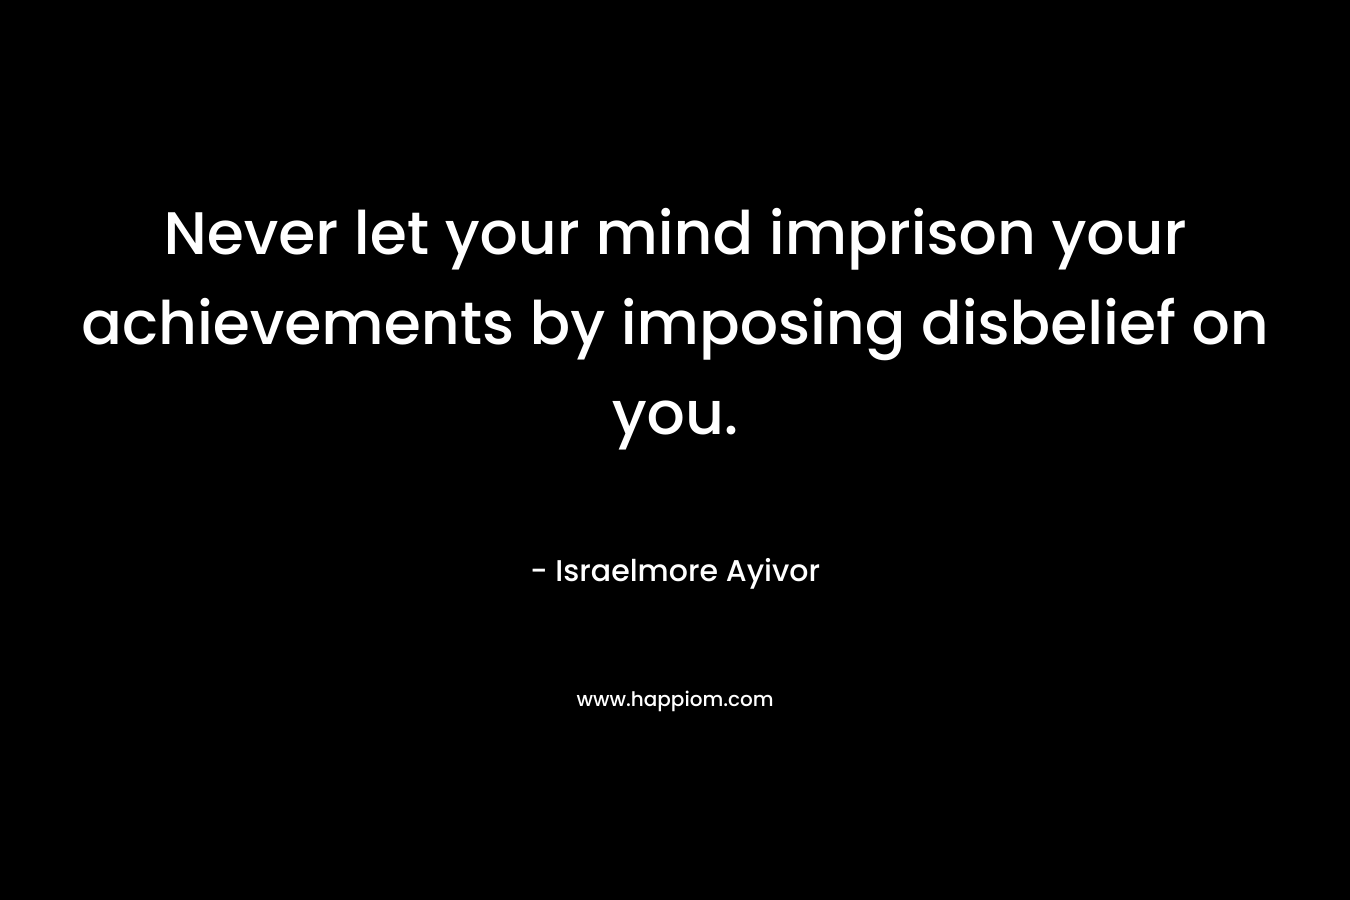 Never let your mind imprison your achievements by imposing disbelief on you. – Israelmore Ayivor